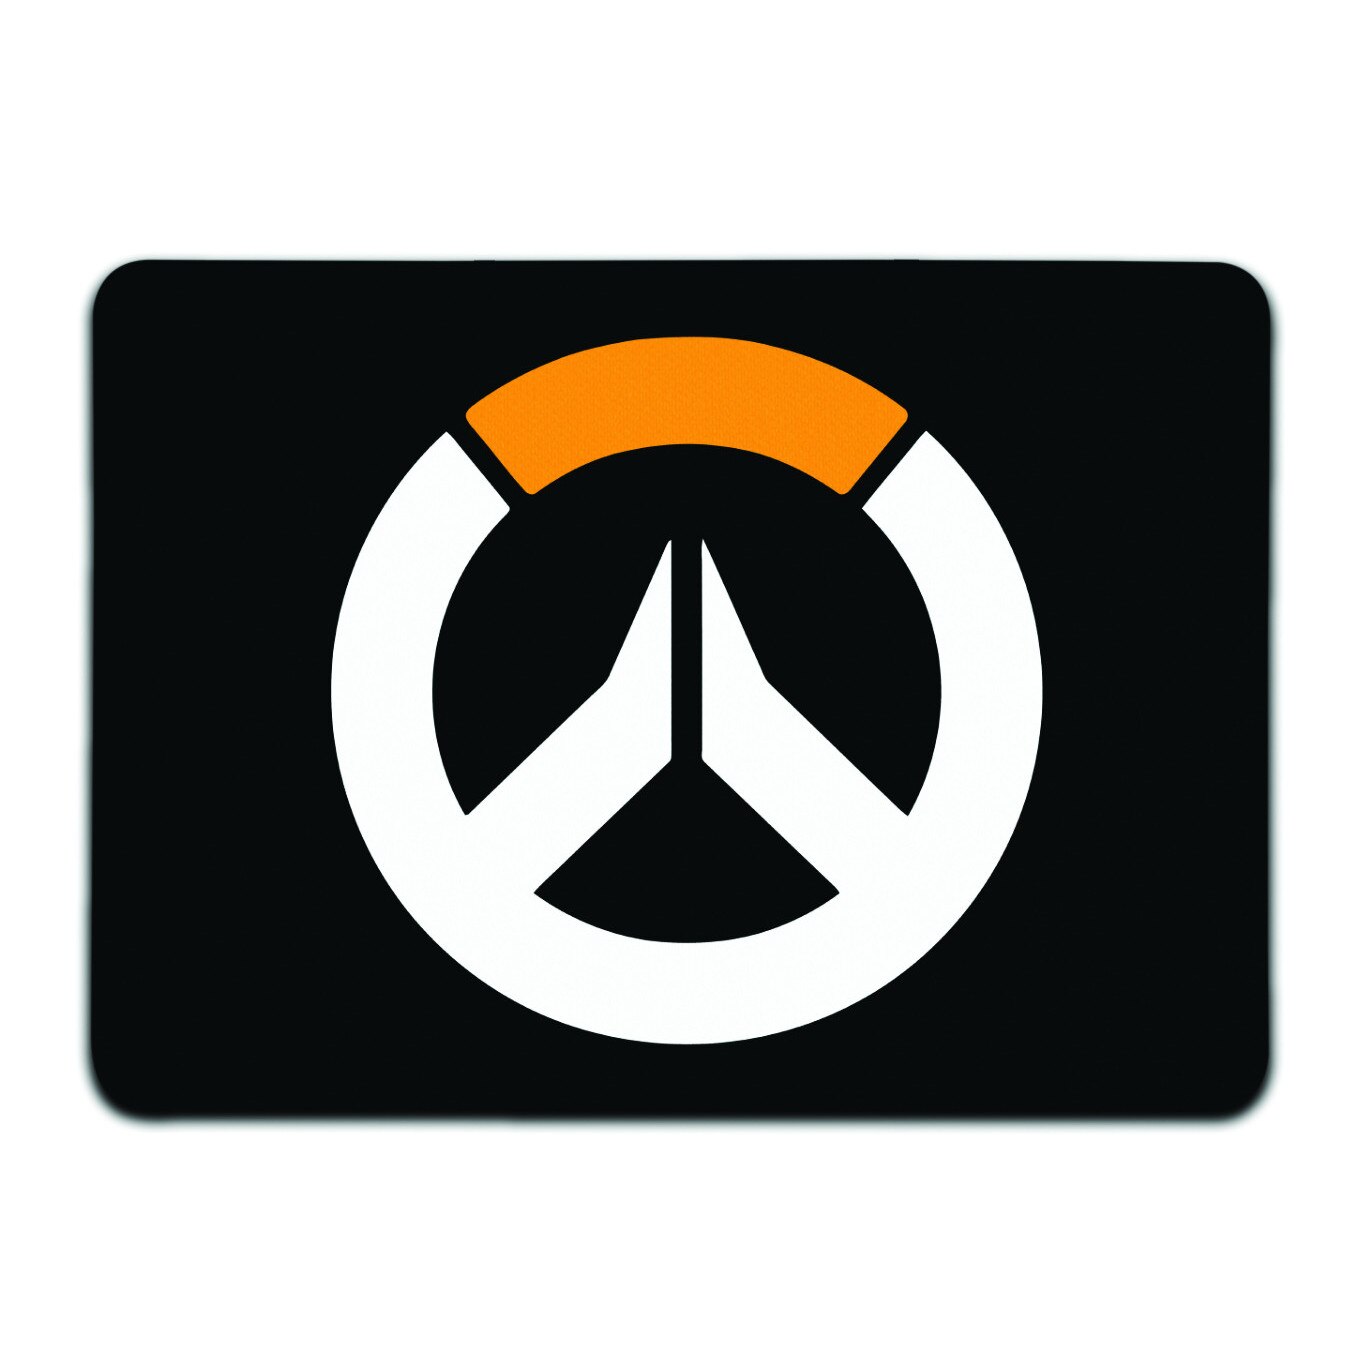 Overwatch ultimate